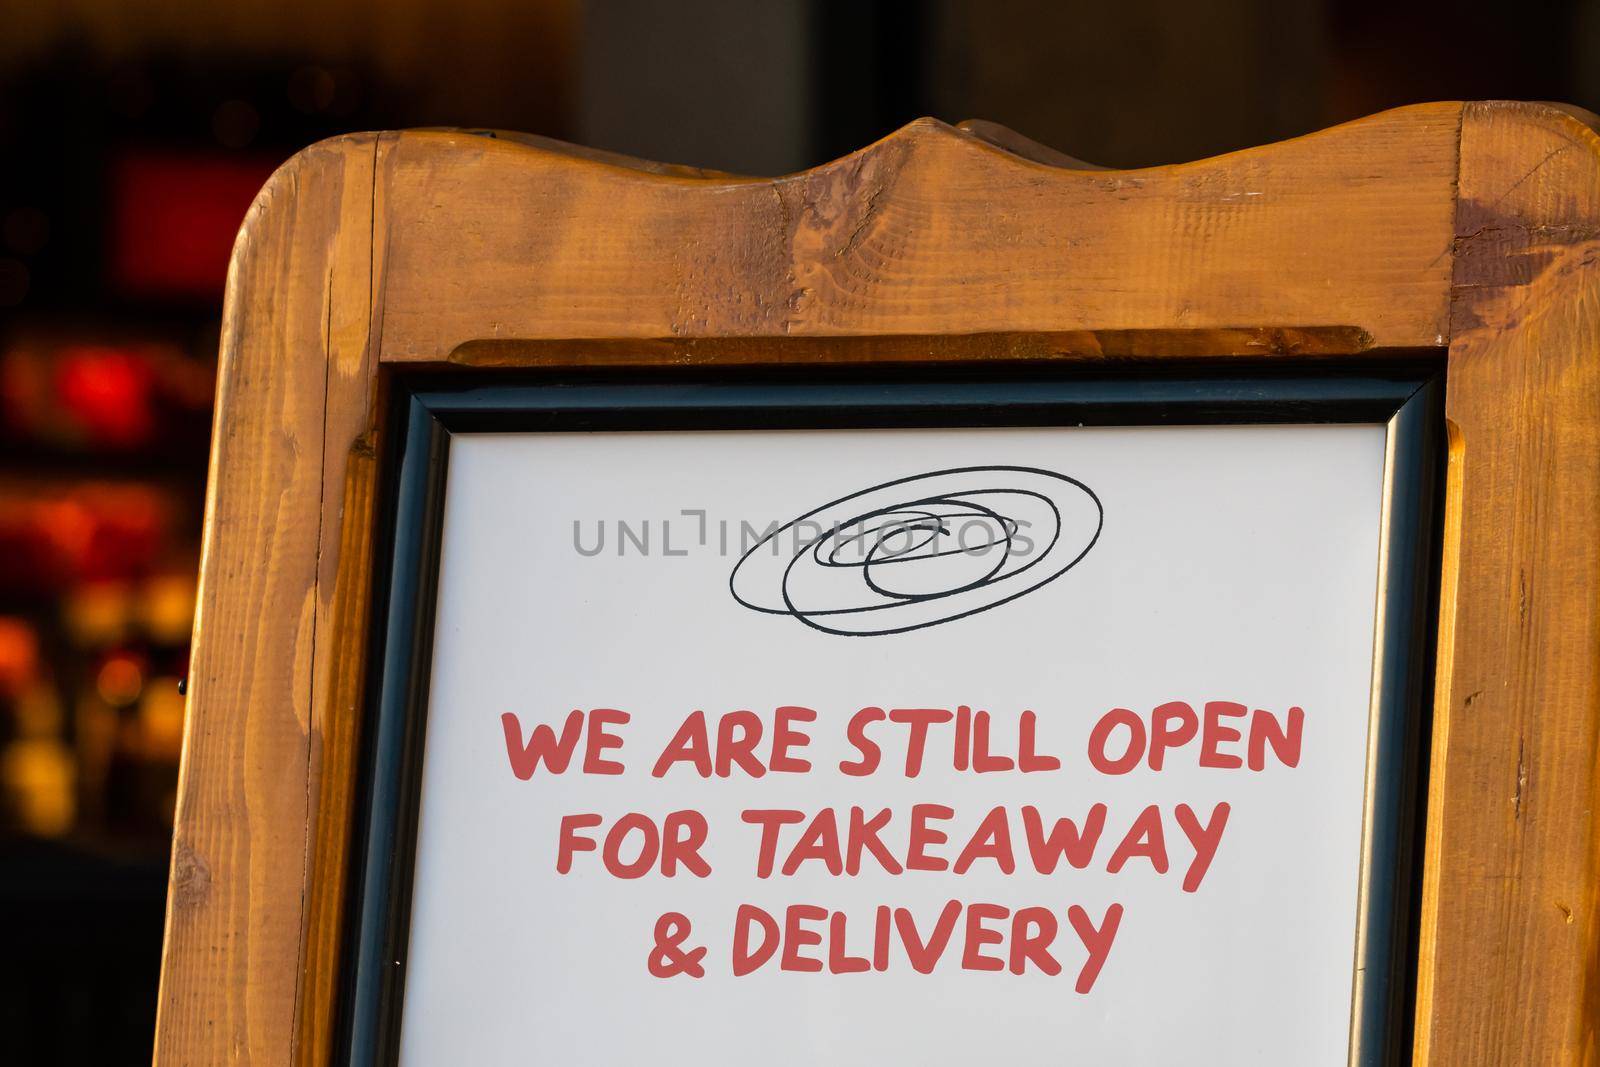 Open take away only sign outside a restaurant during lockdown caused by Covid-19 pandemic. Cambridge, UK